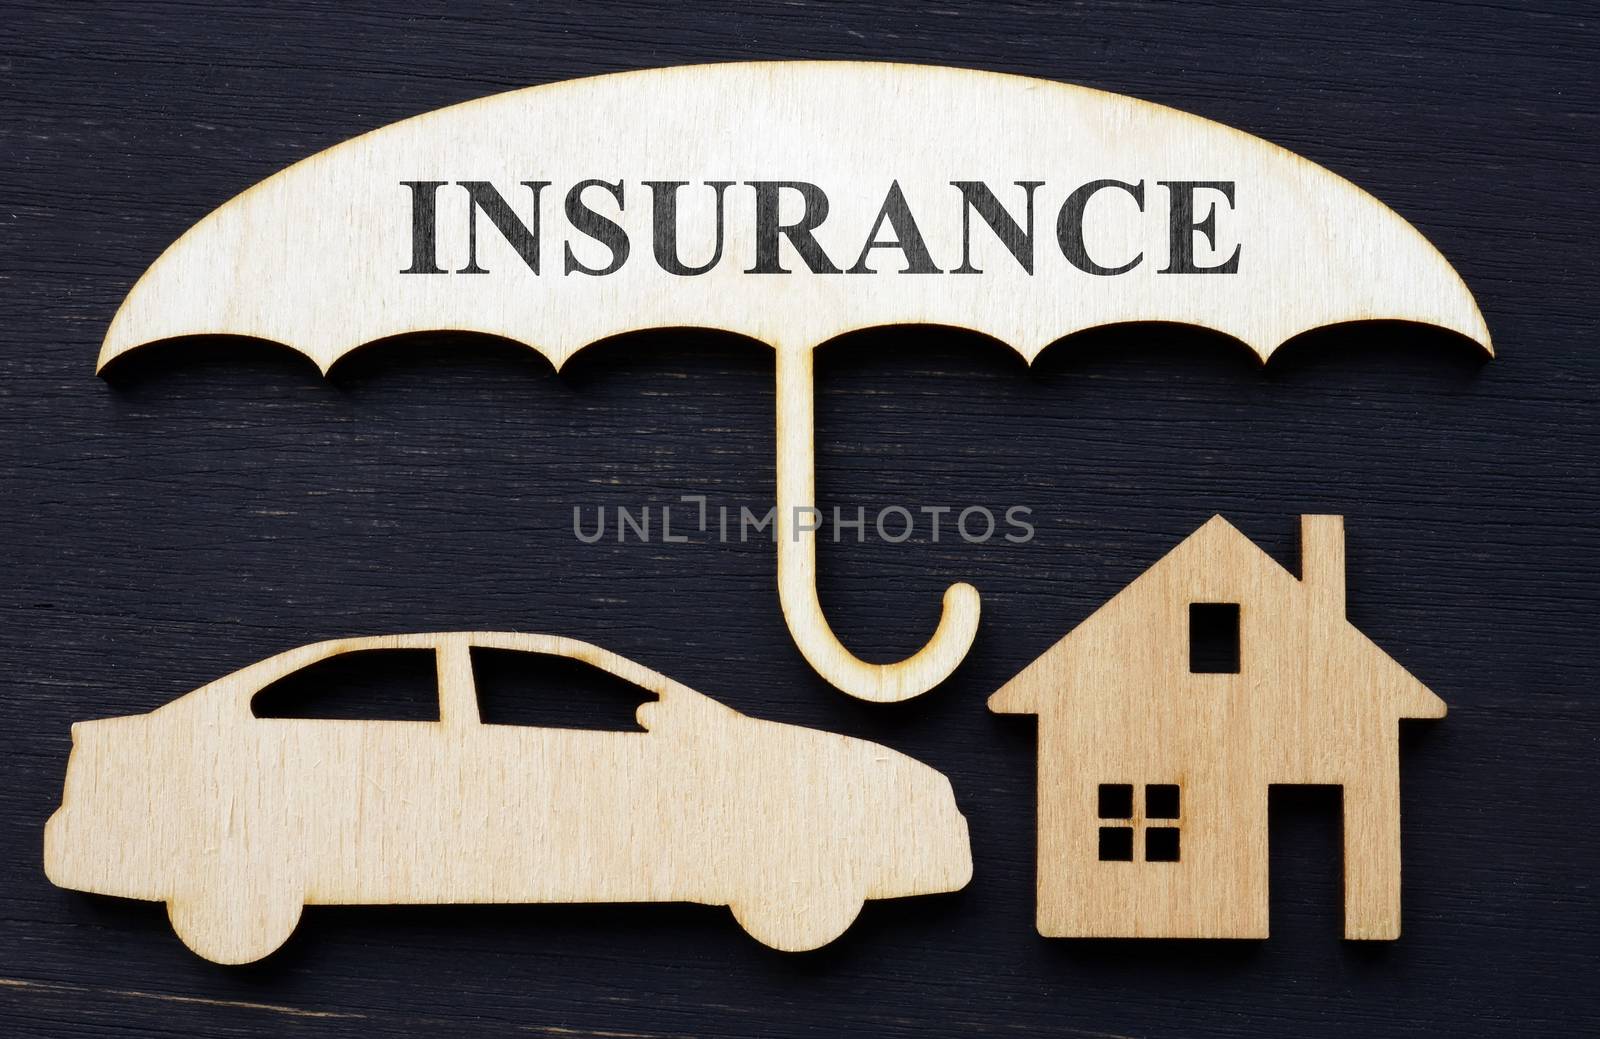 Comprehensive car and home insurance. Wooden umbrella and models.